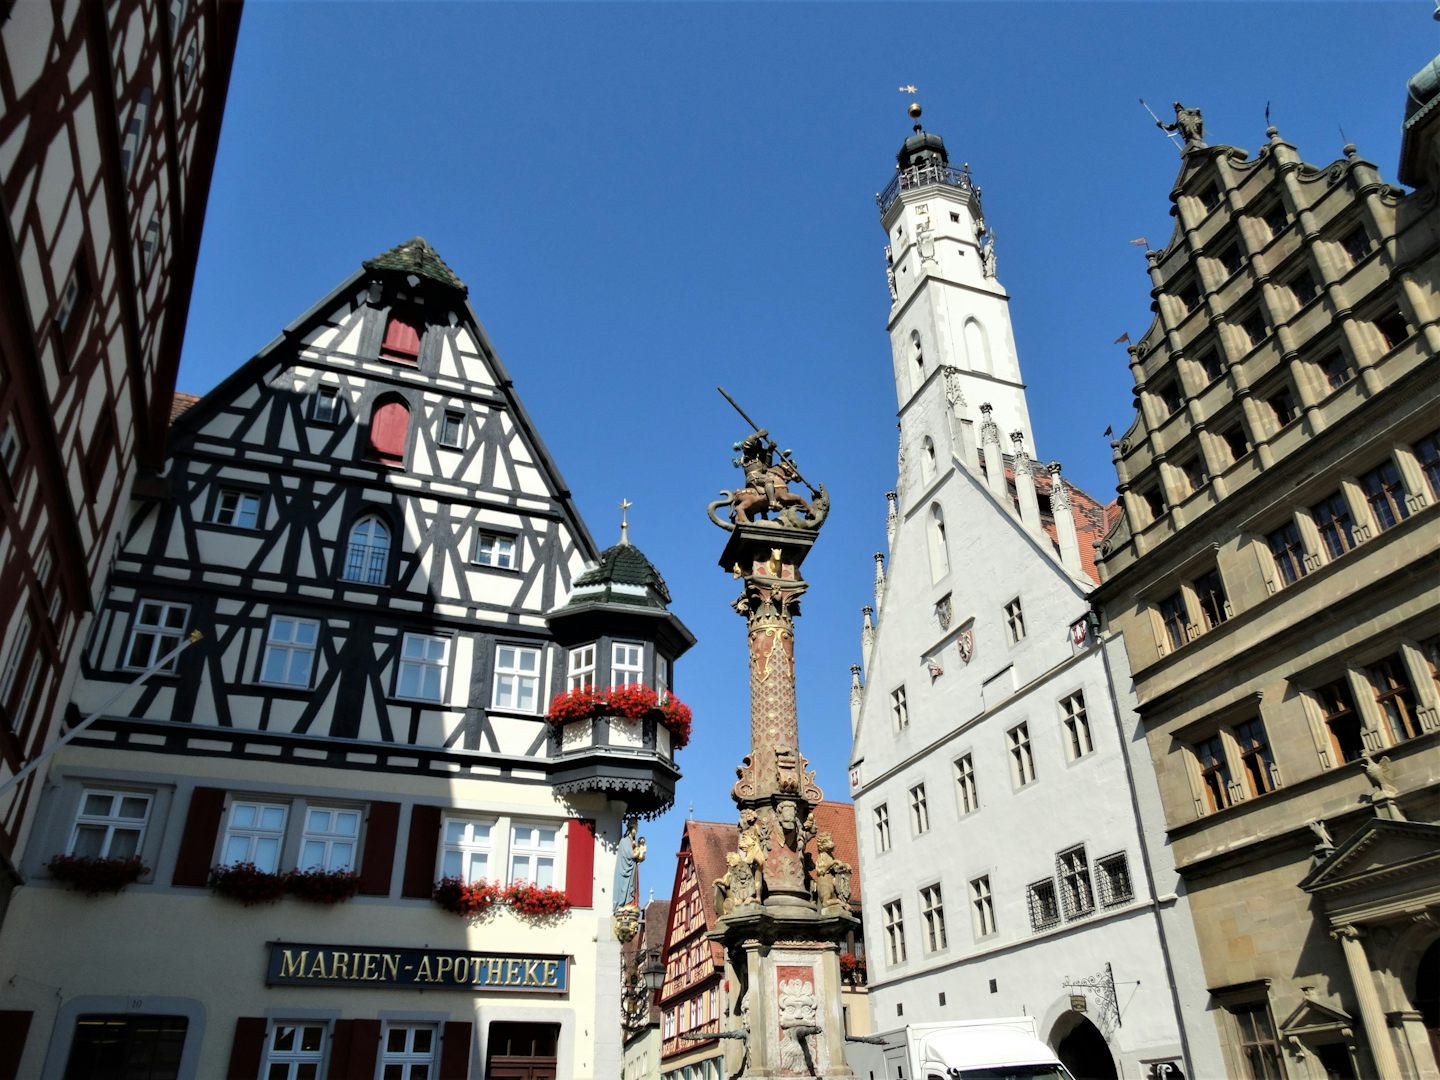 Rothenburg ob der Tauber was a day trip from our stop in Wurzburg.  We love